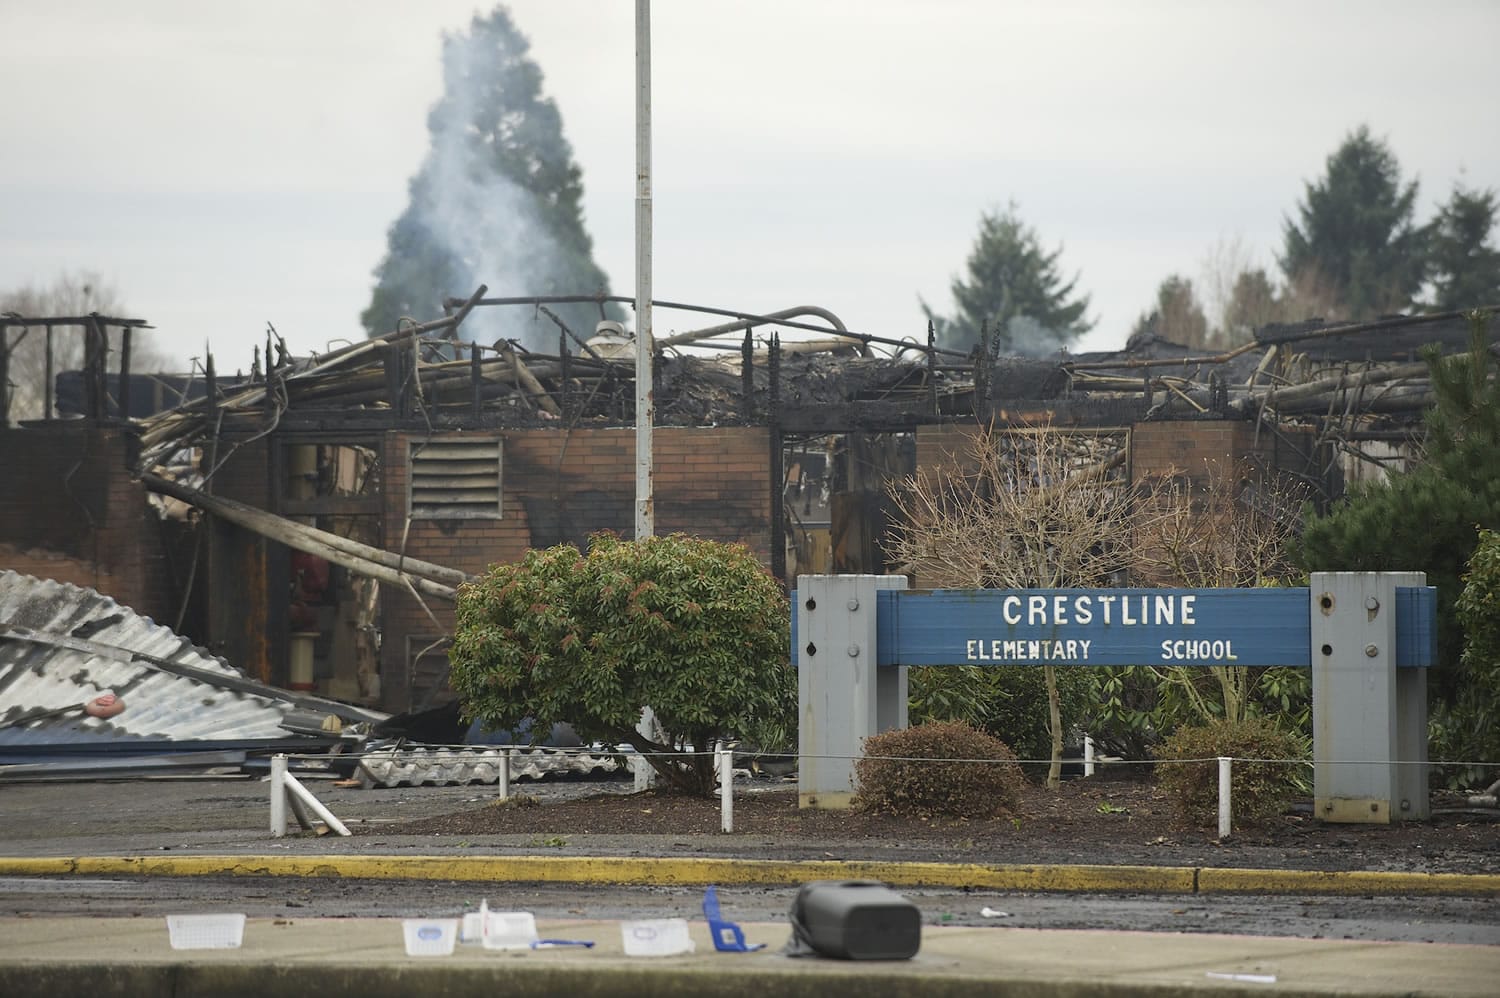 Fire investigators will try to examine the ruins of Crestline Elementary as soon as it is safe to do so.